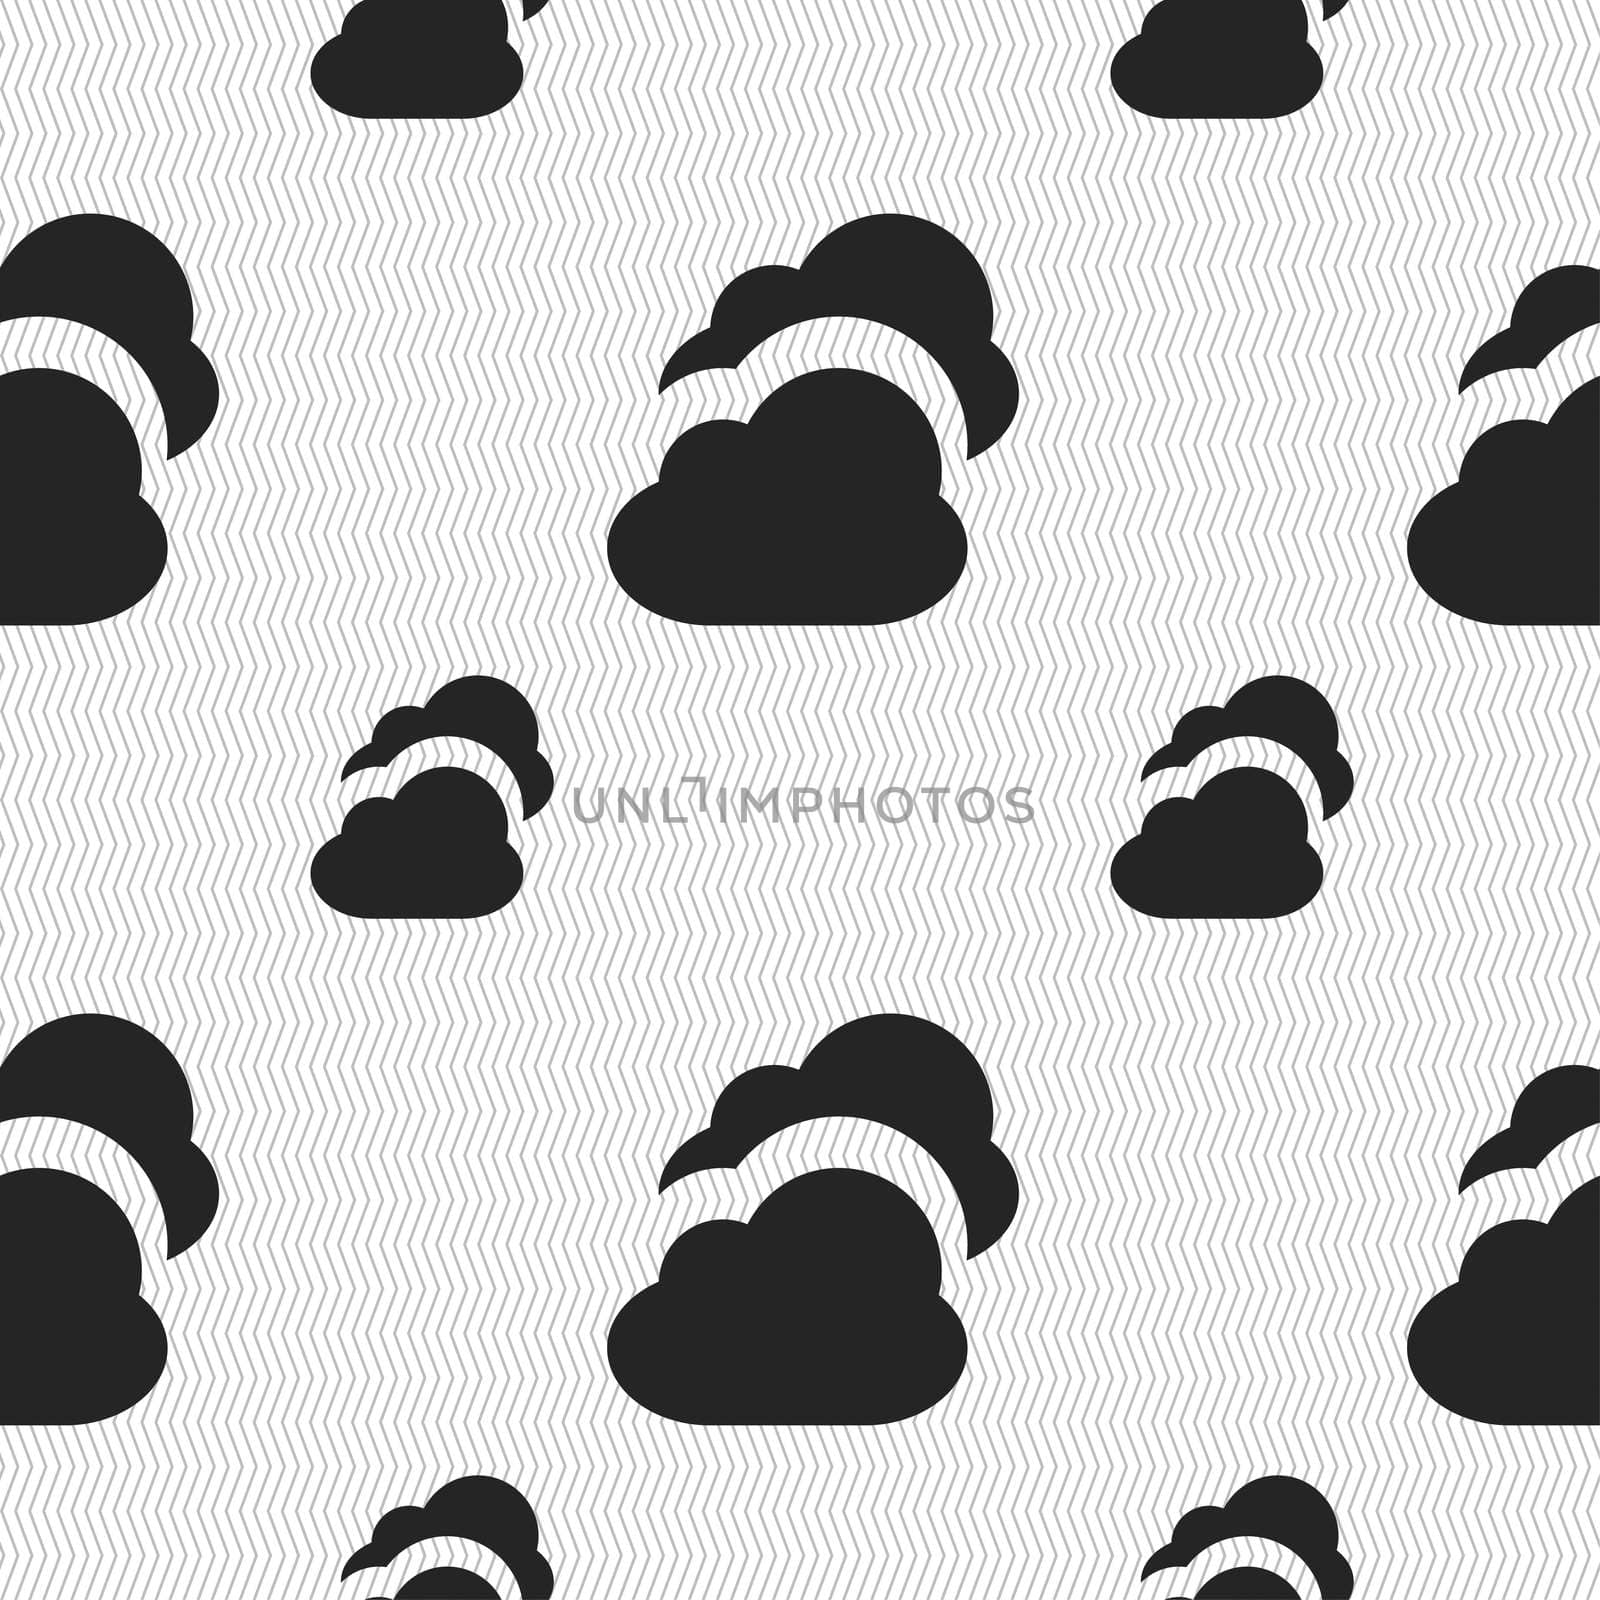 Cloud icon sign. Seamless pattern with geometric texture. illustration